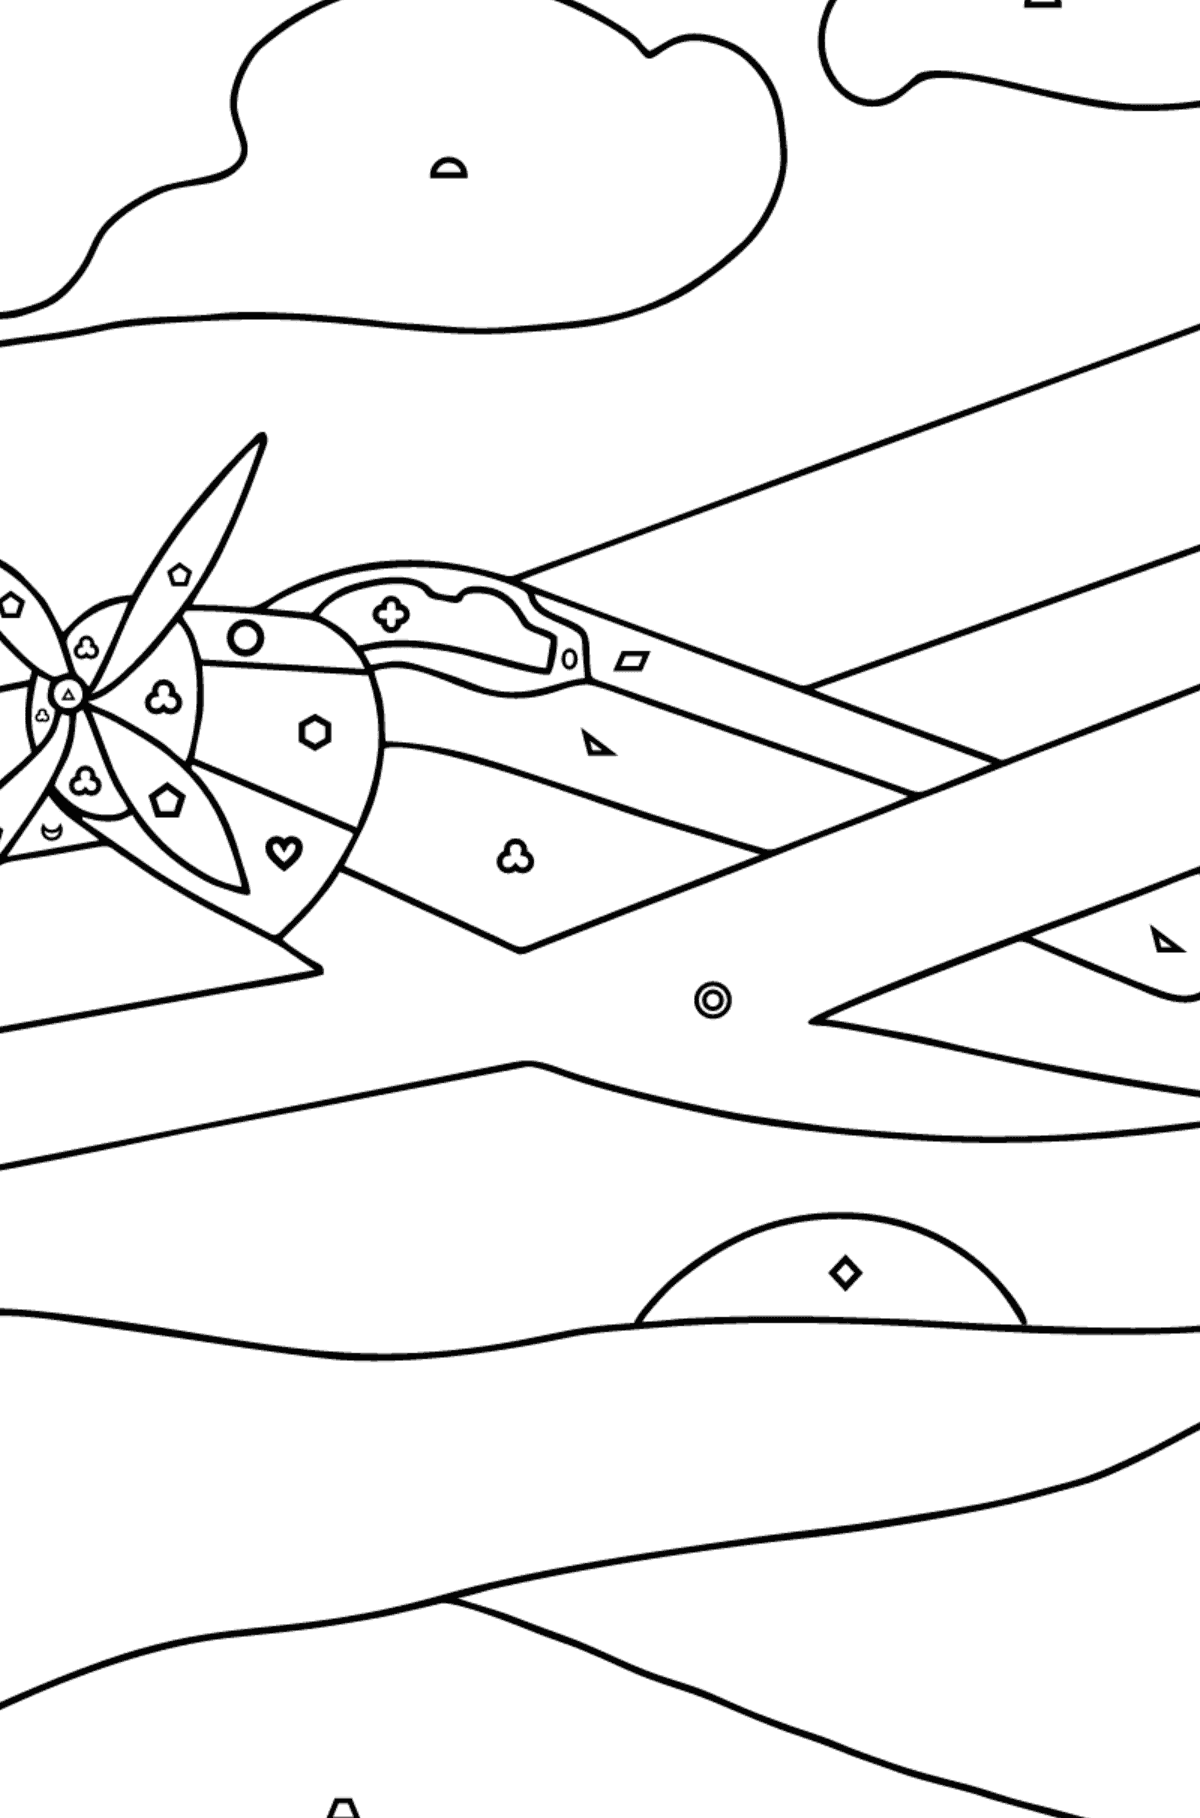 Coloring Page - A Biplane - Coloring by Geometric Shapes for Children